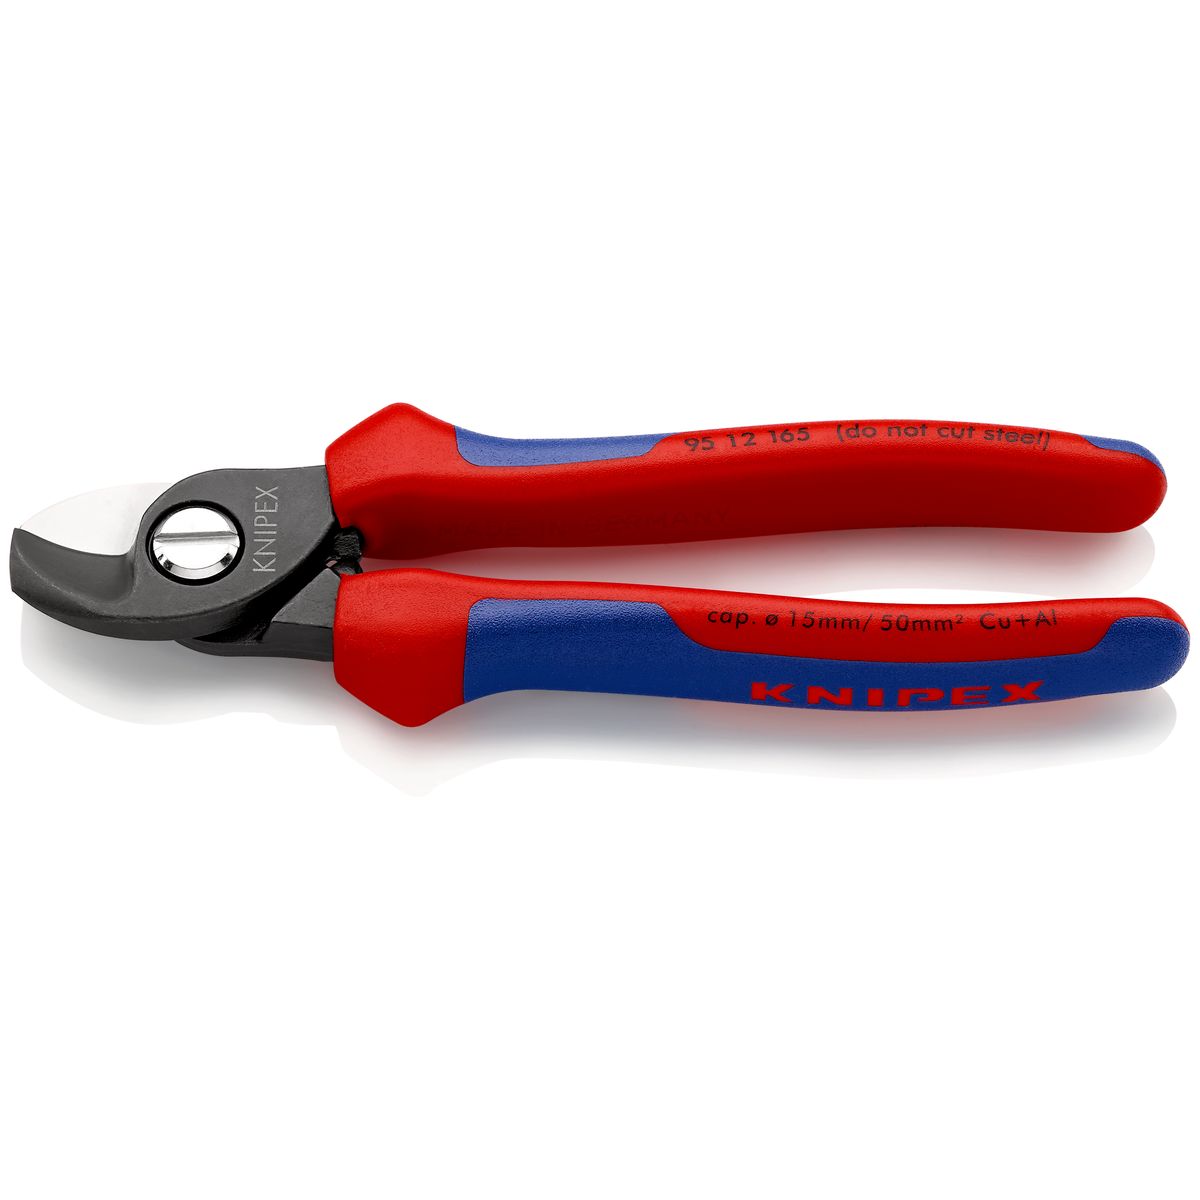 CABLE SHEARS 9512 165mm Knipex